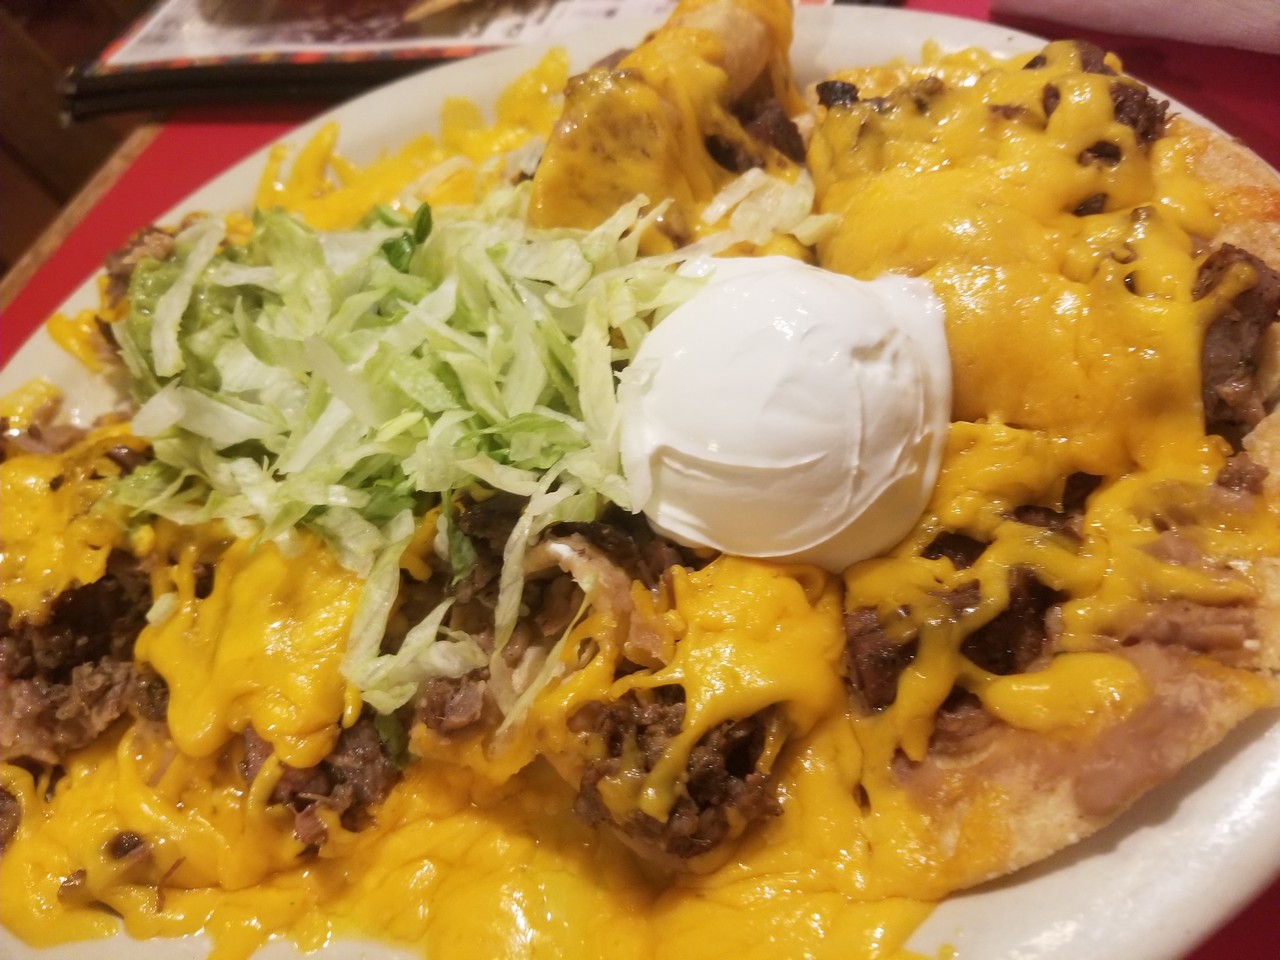 a plate of food with cheese and lettuce